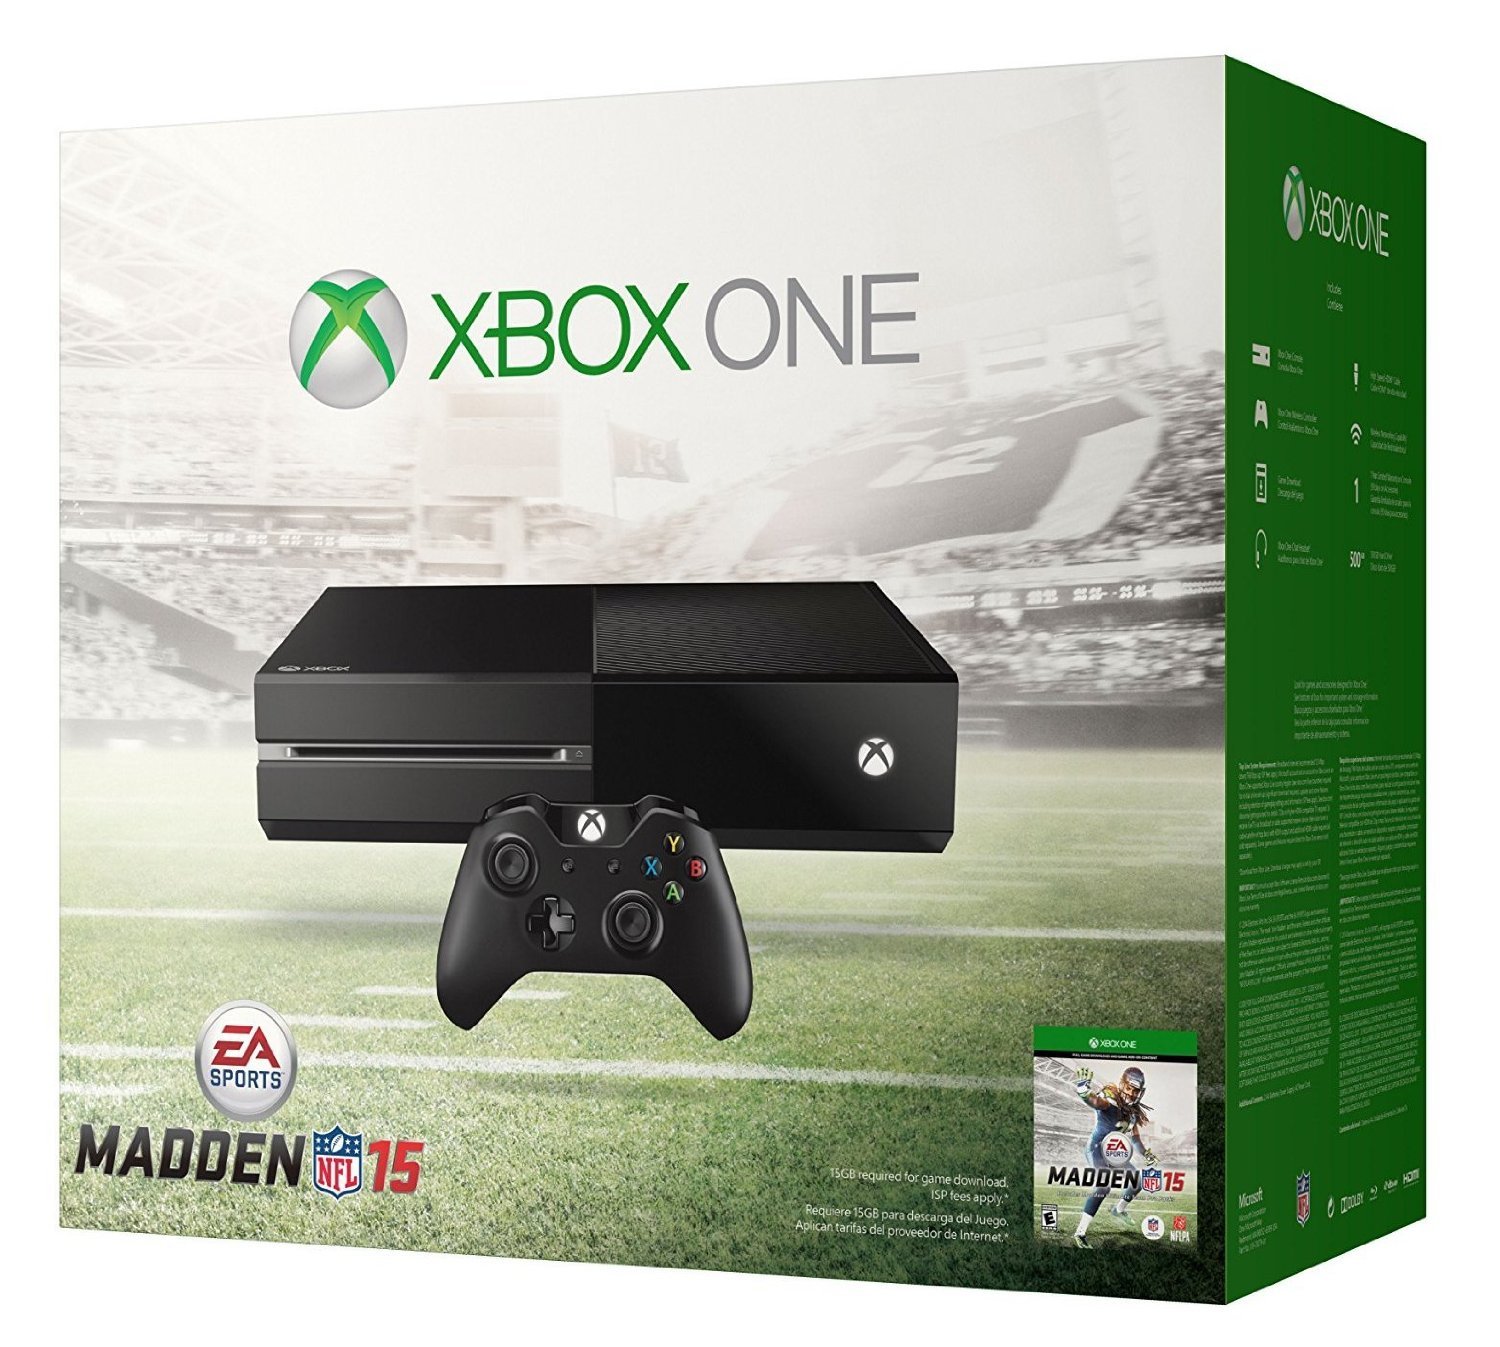 Score a free Madden 15 digital copy with the Xbox One Bundle.